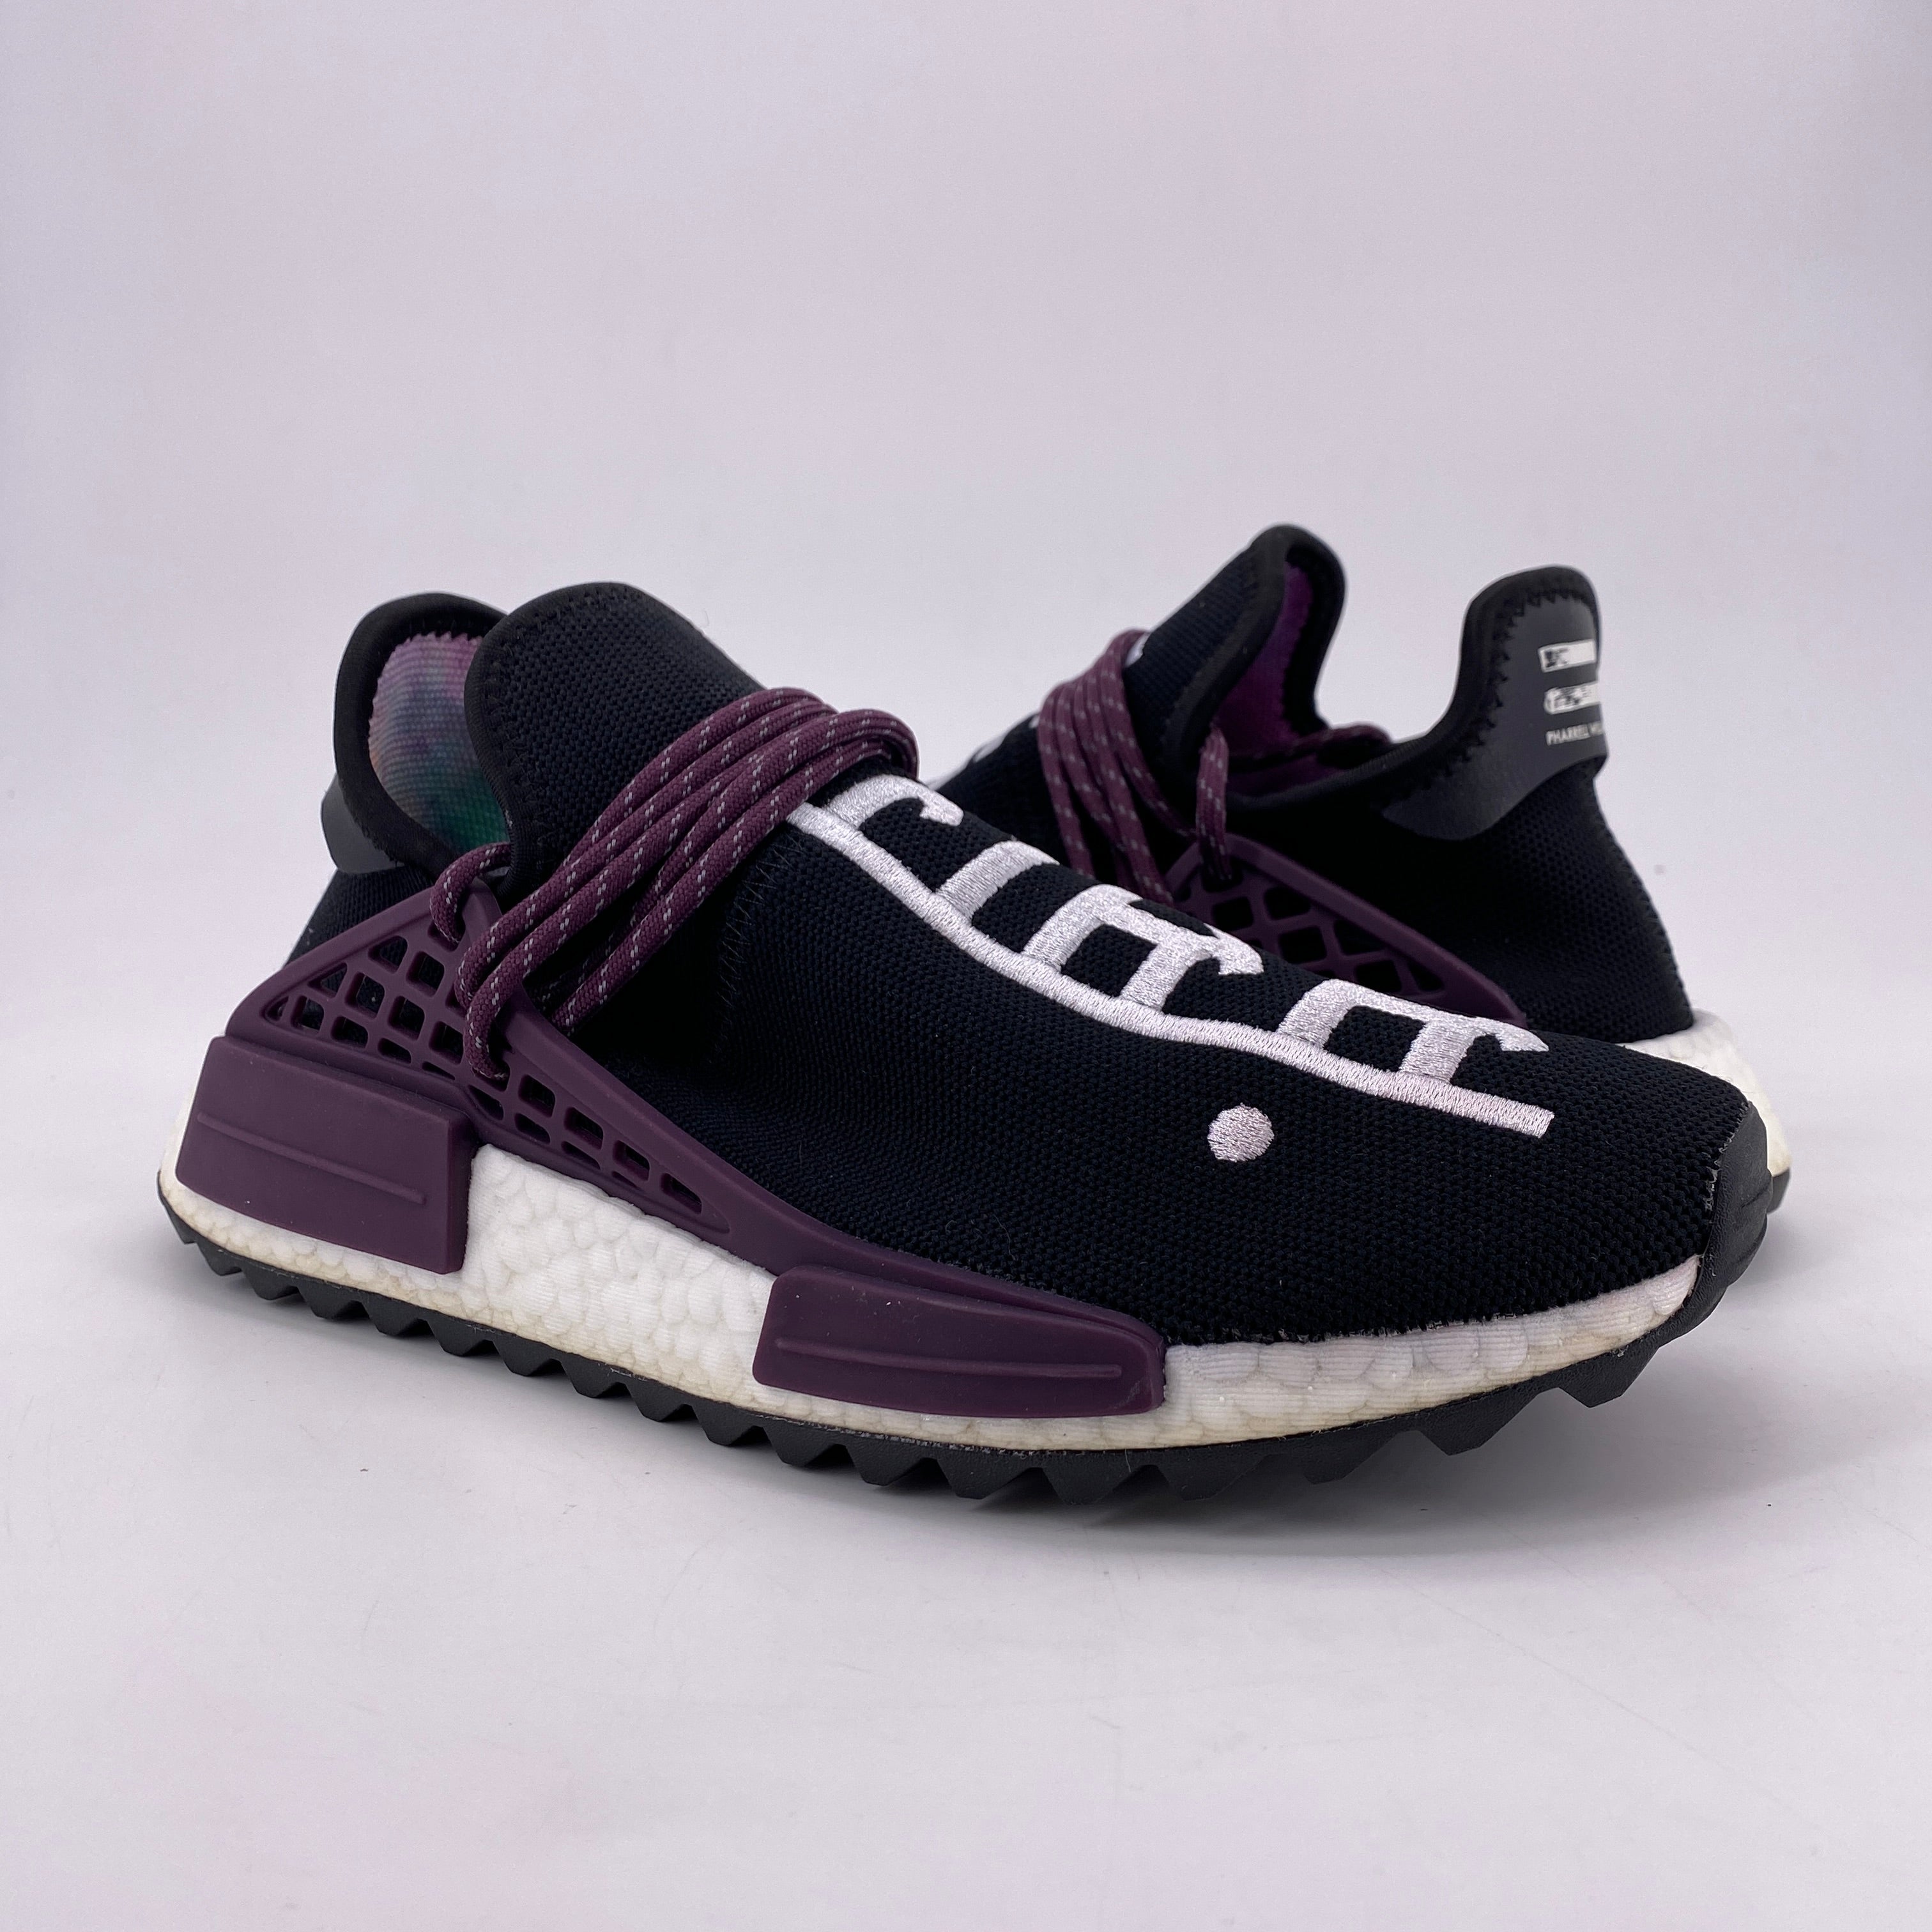 Adidas NMD HU &quot;Holi Festival&quot; 2018 Used Size 8